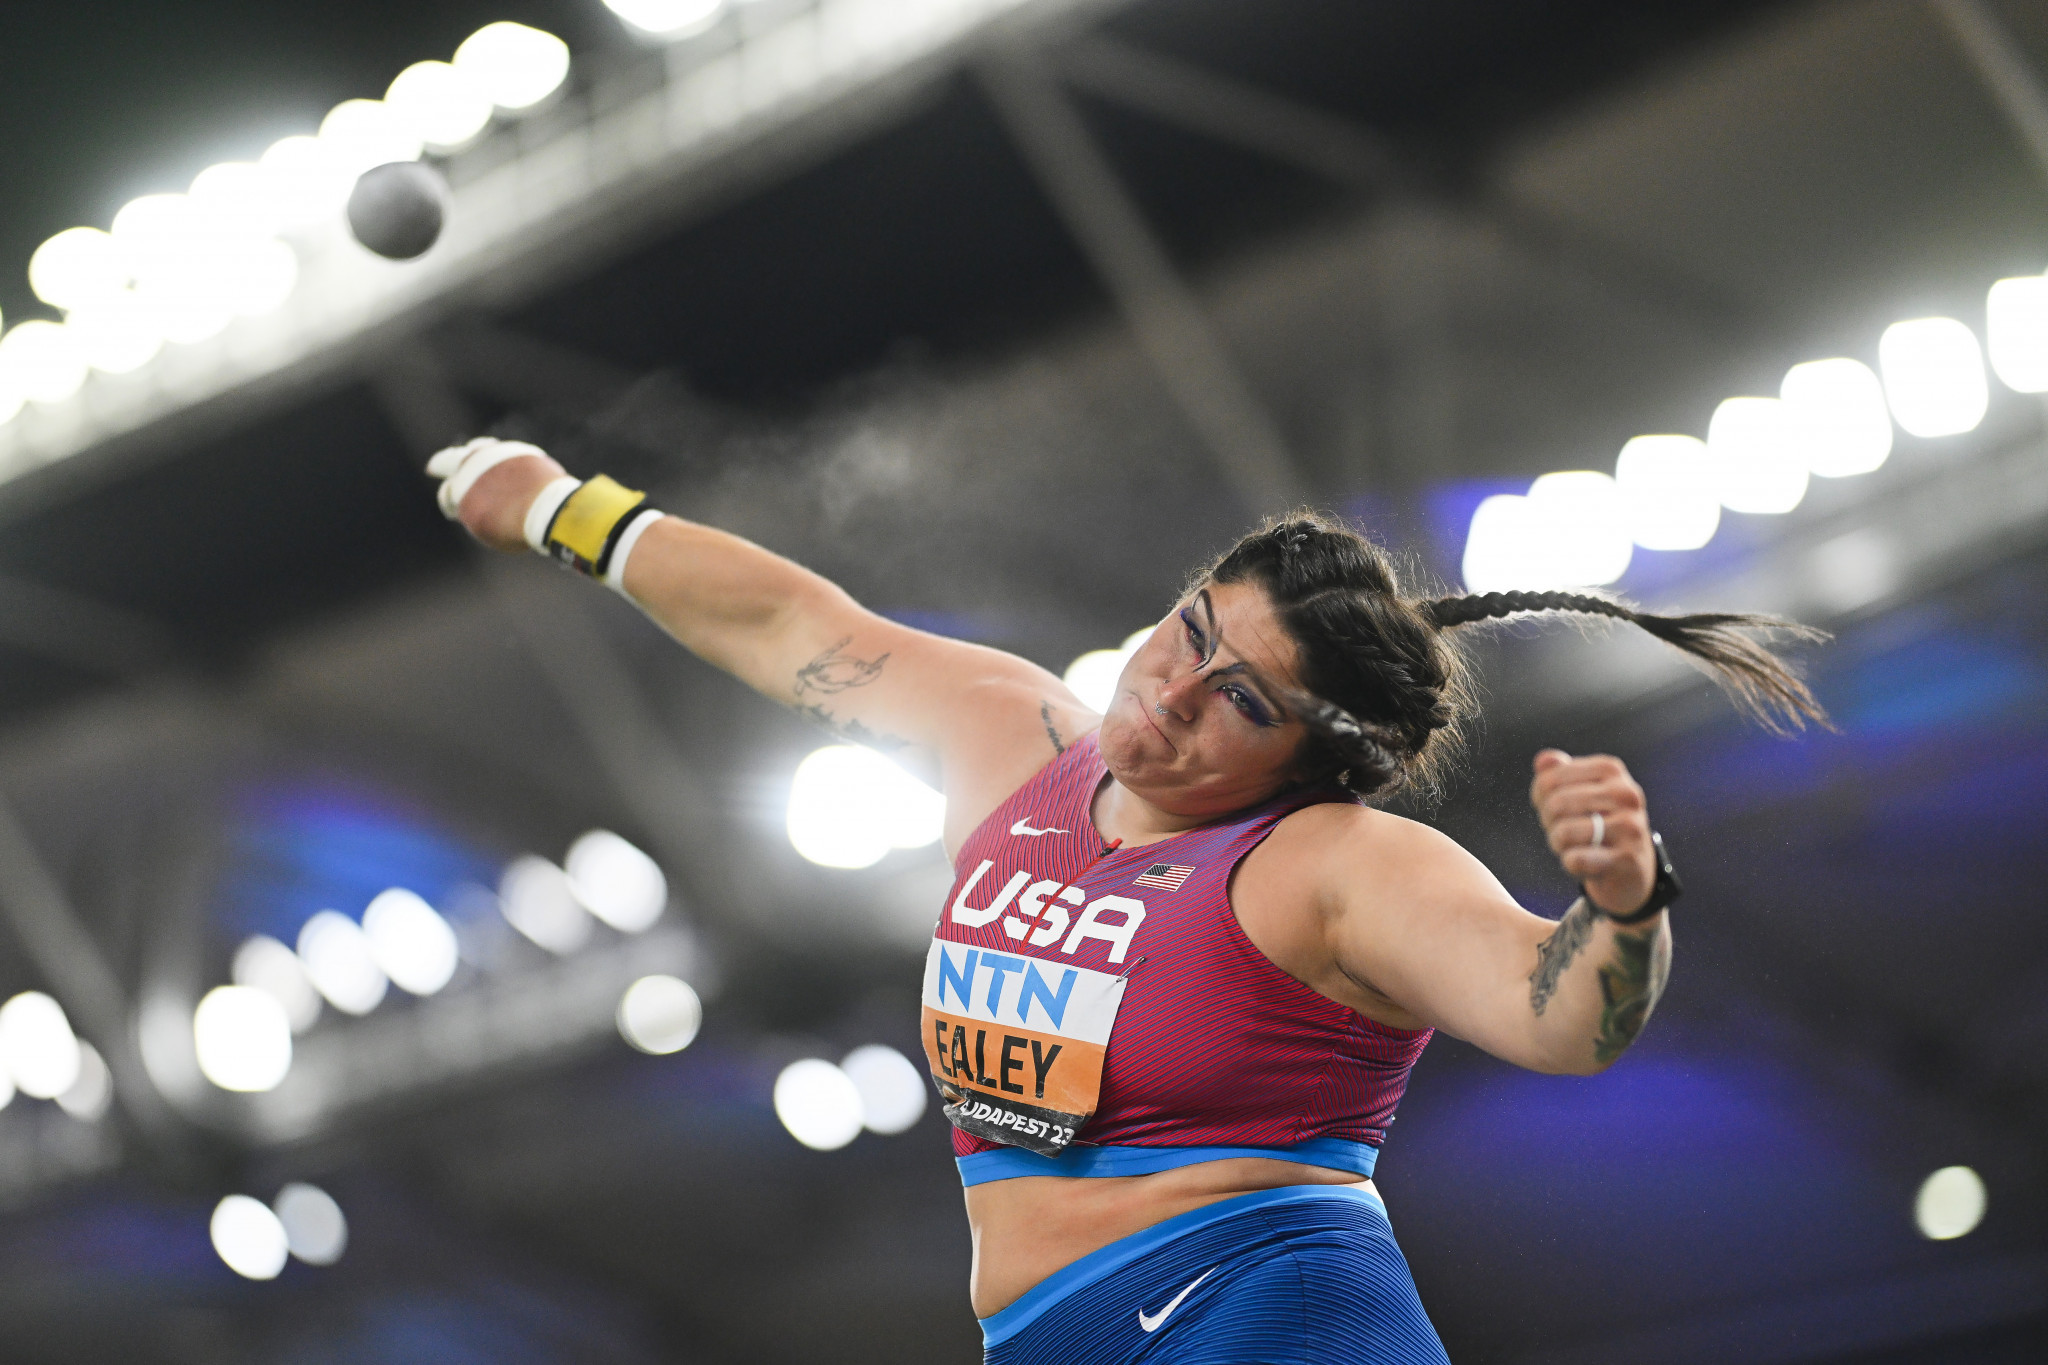 Chase Ealey had earlier won women's shot put gold for the US to ensure they finished the penultimate day with a further three victories ©Getty Images